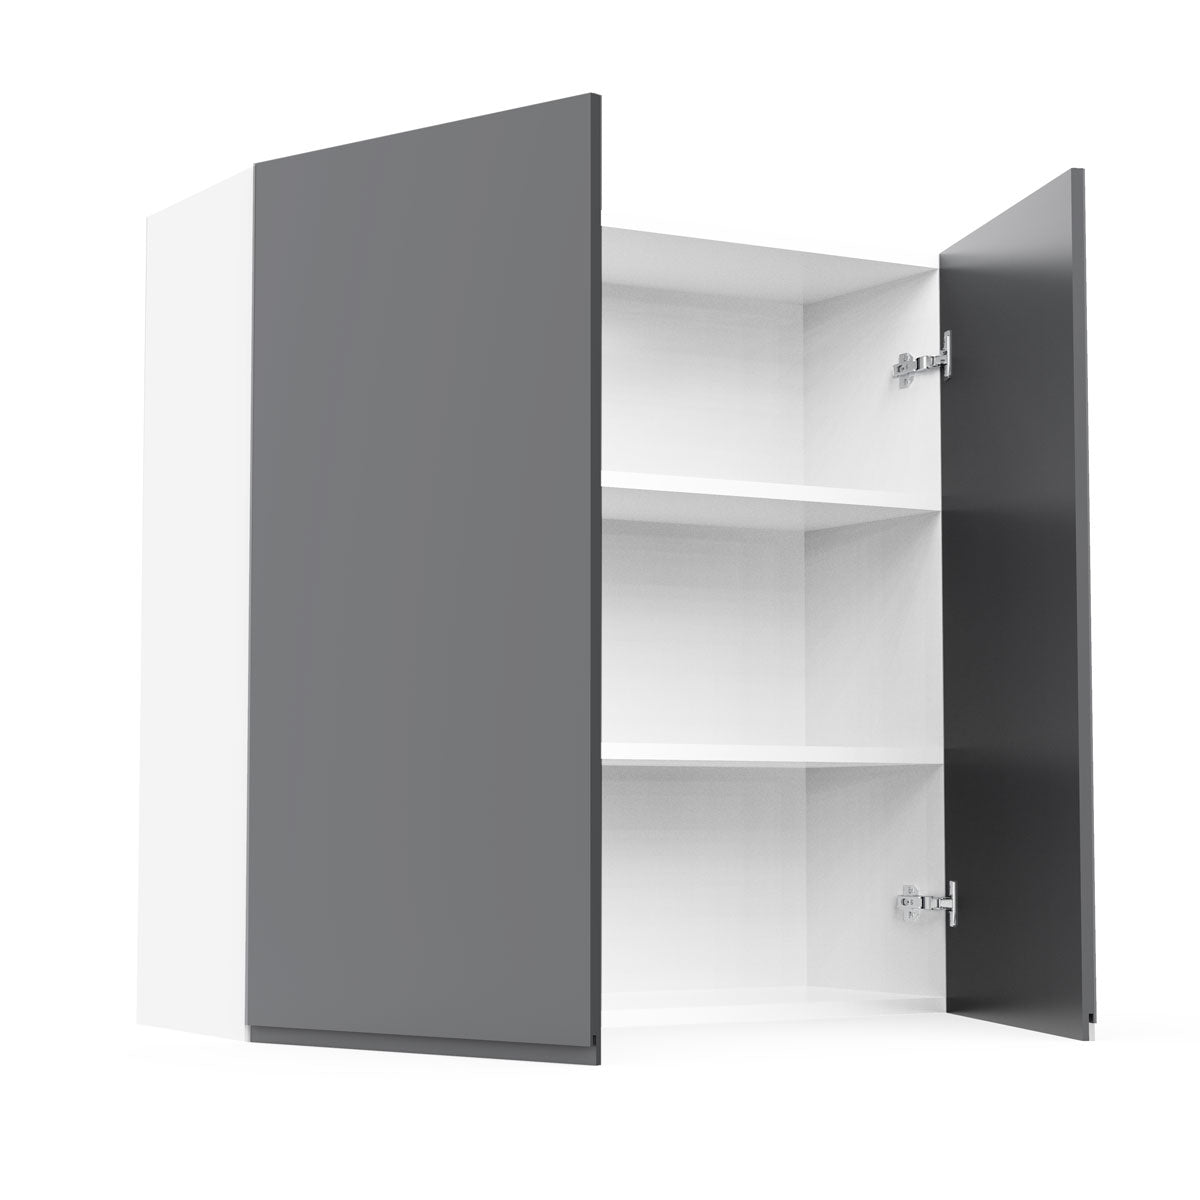 RTA - Lacquer Grey - Double Door Wall Cabinets | 36"W x 36"H x 12"D